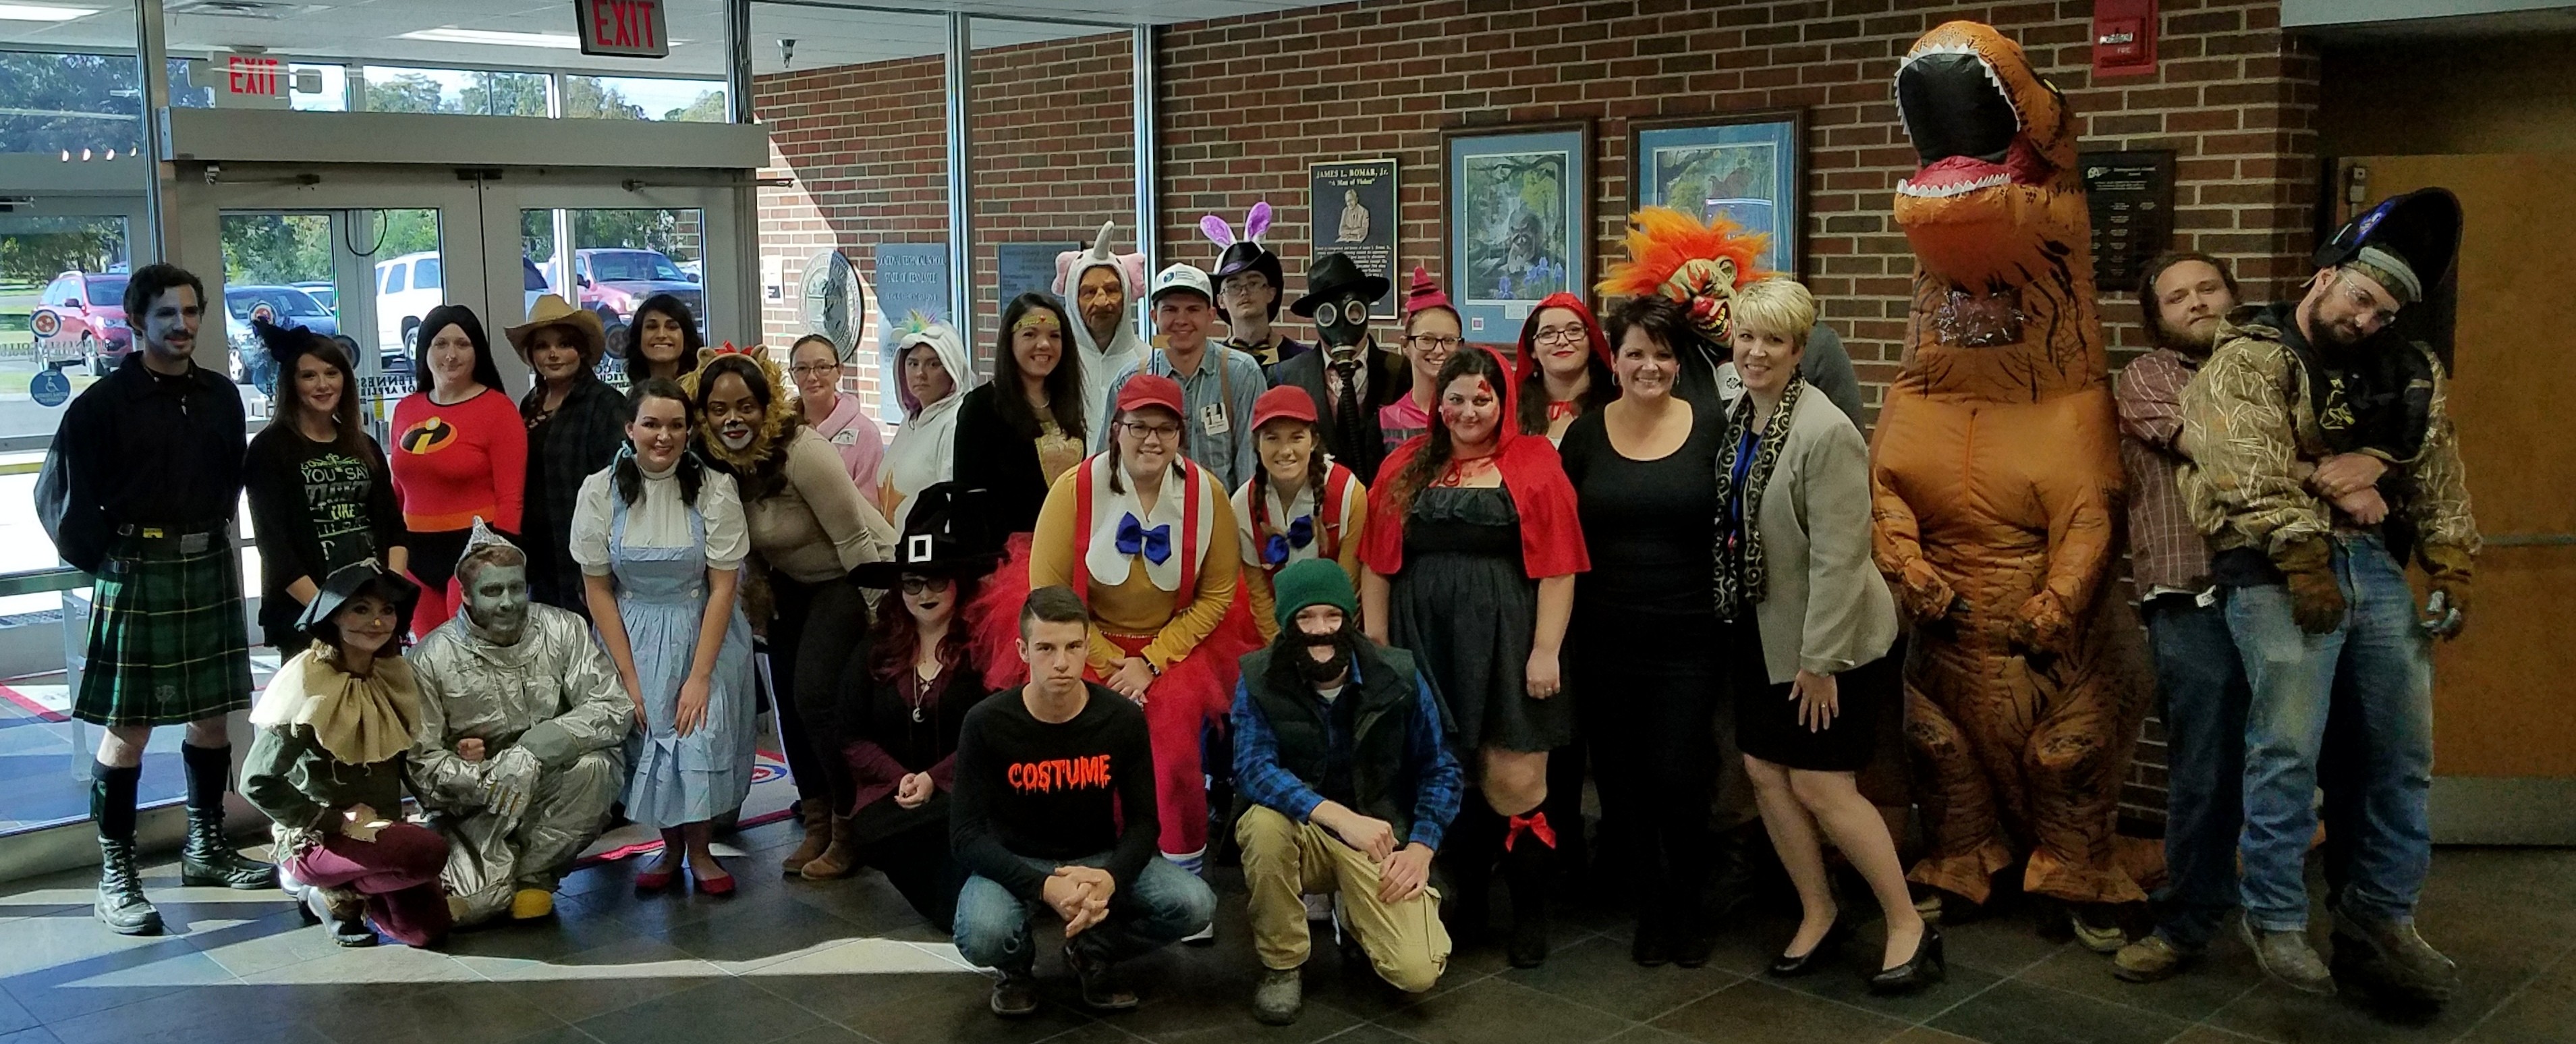 Halloween Costume Contest hosted by Southern Connections TCAT Shelbyville